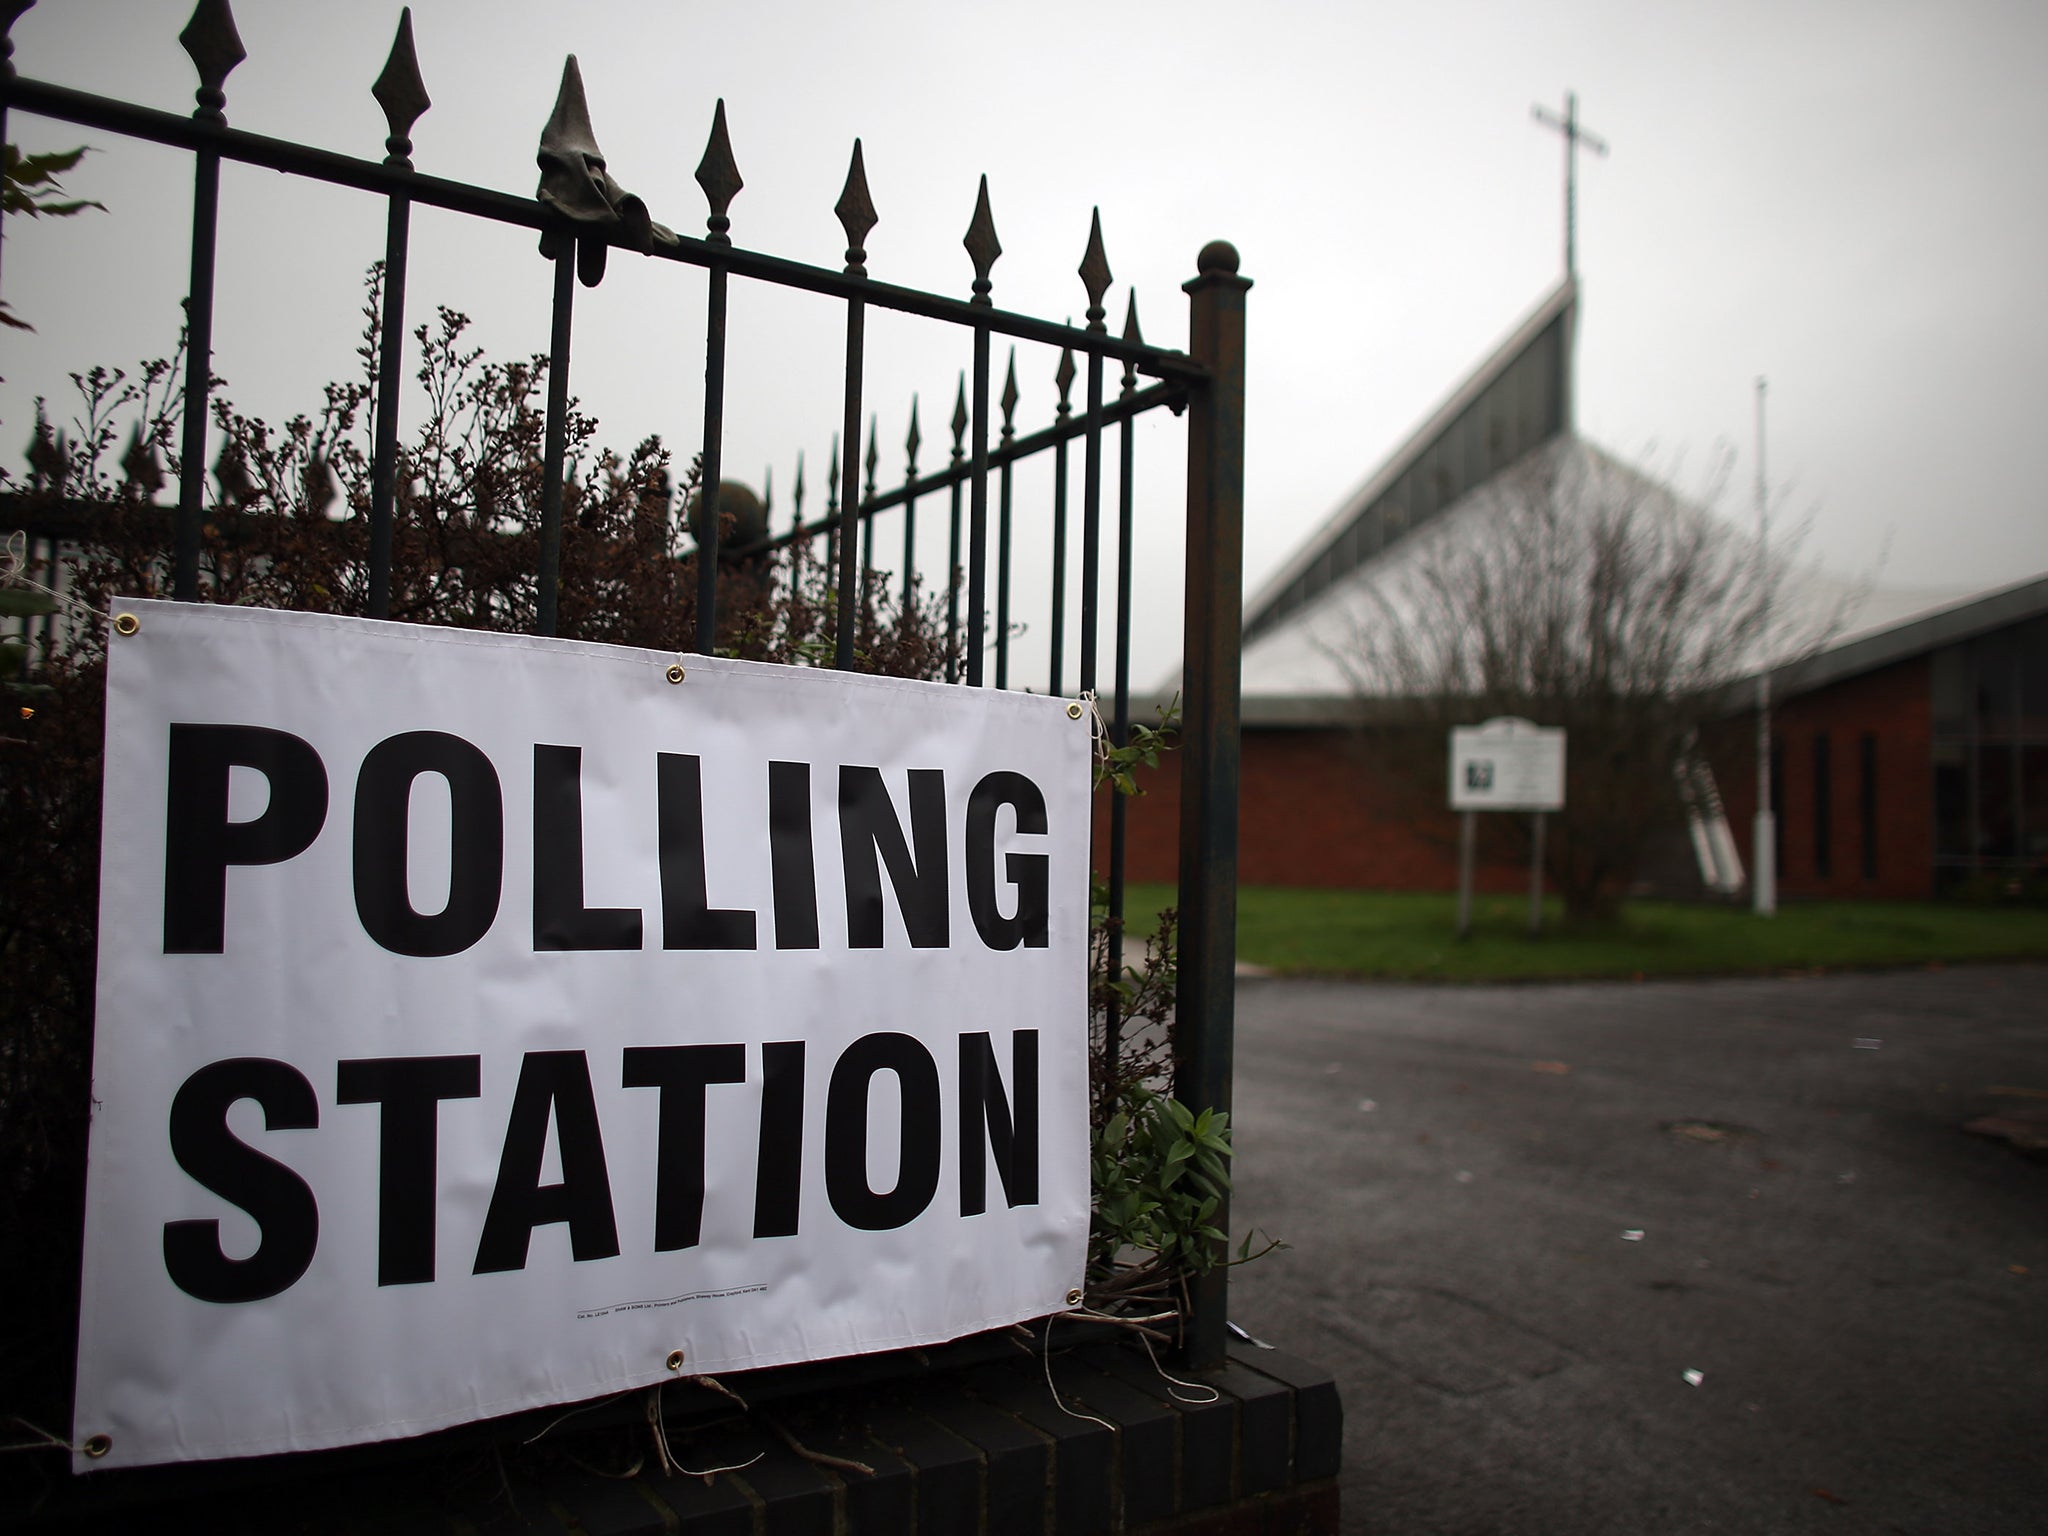 Almost one million people have gone missing from the electoral roll in the past year